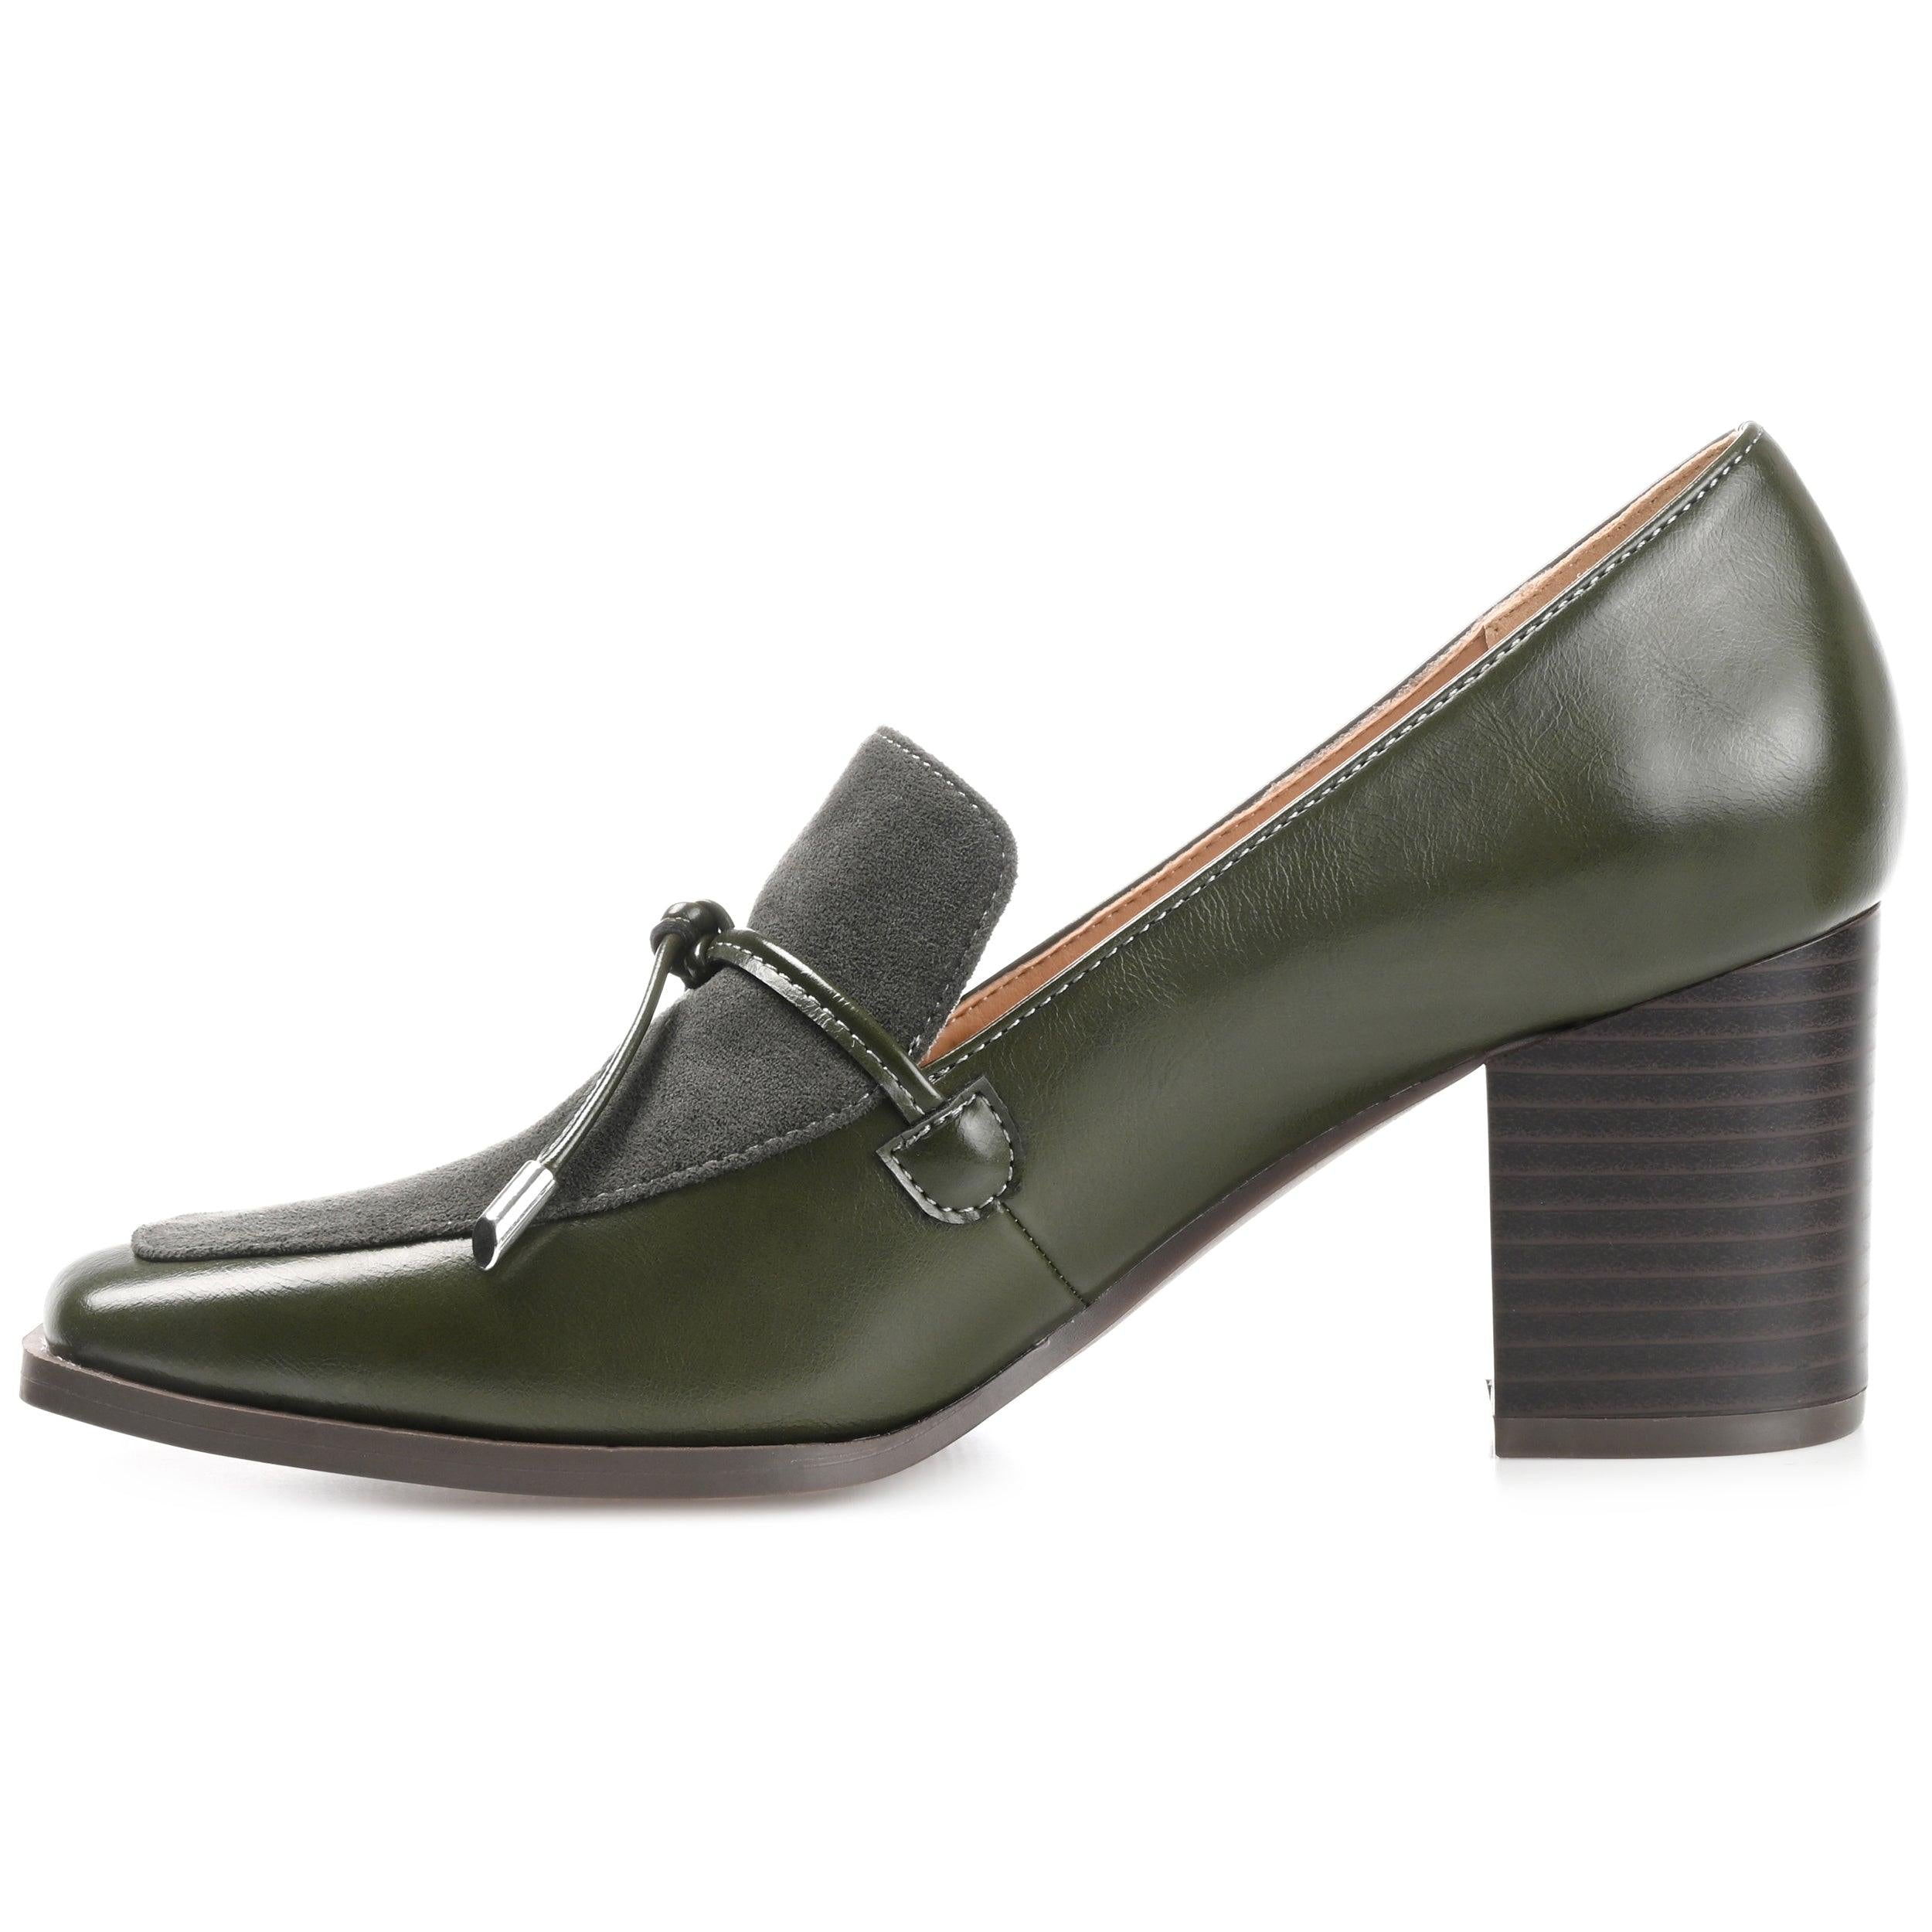 CRAWFORD HEELED LOAFERS IN FAUX LEATHER – Journee Collection